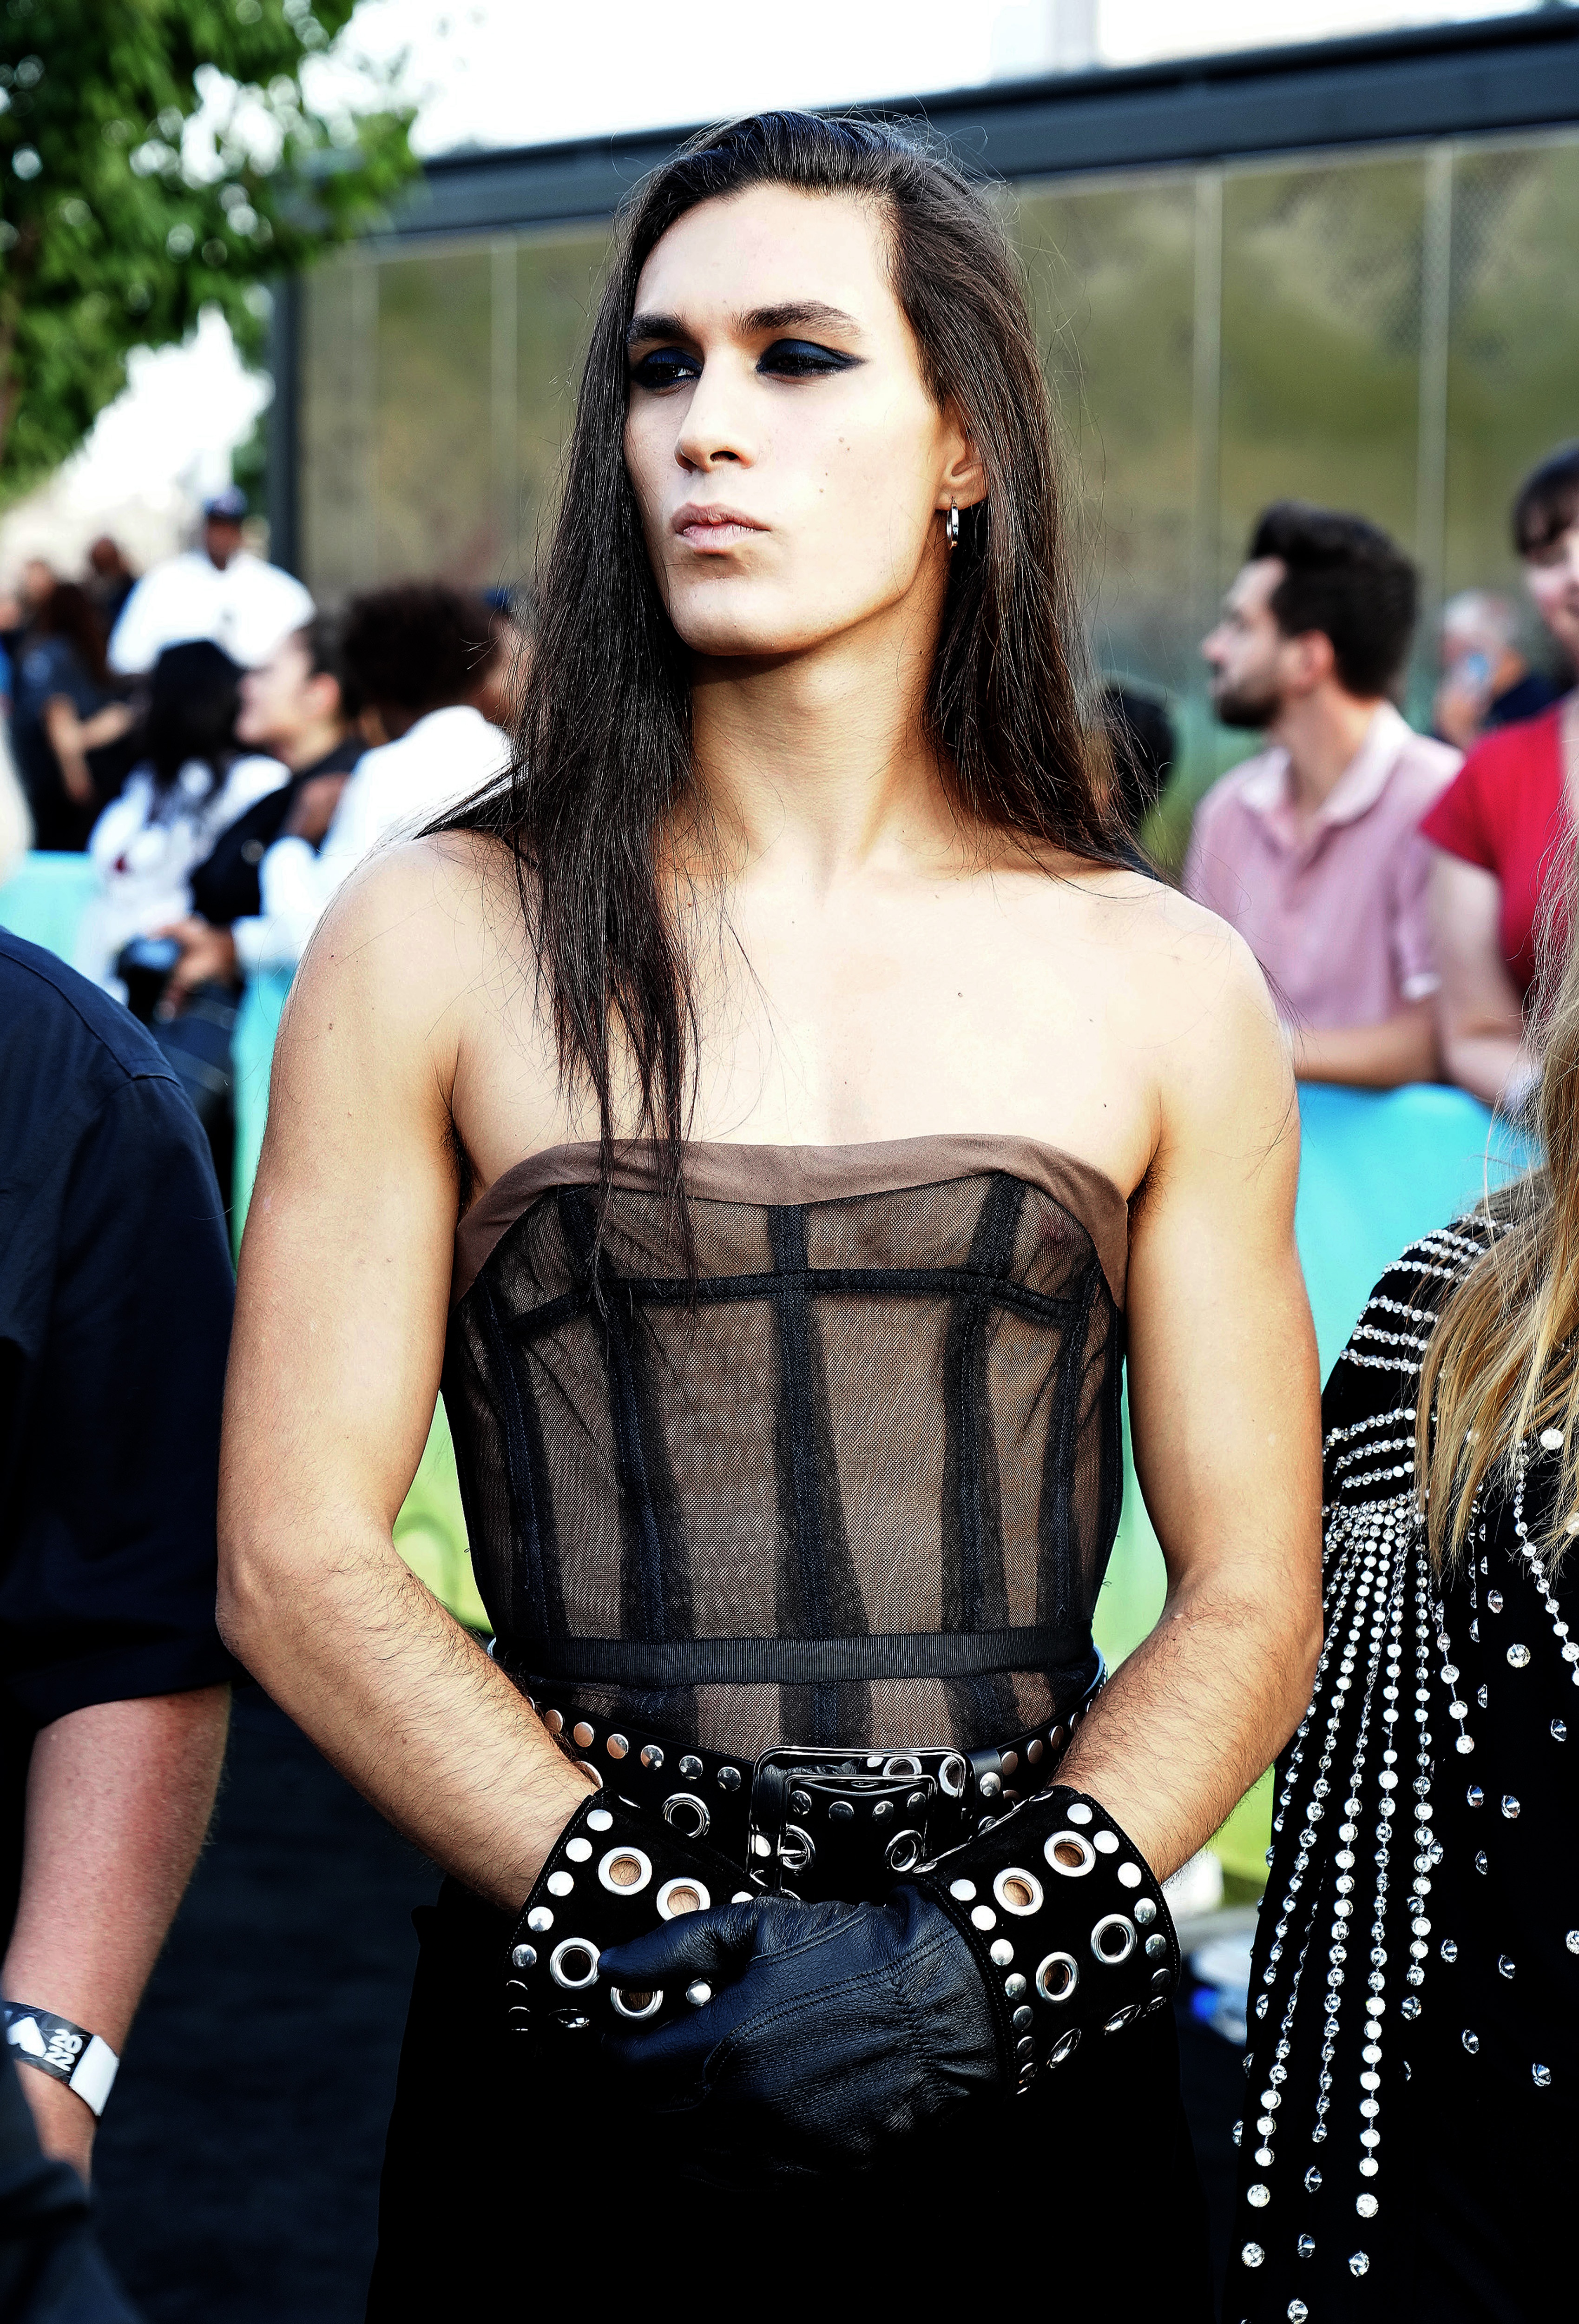 ethan torchio poses on the mtv vmas arrivals carpet wearing a sheer strapless corset and studded black cuffs